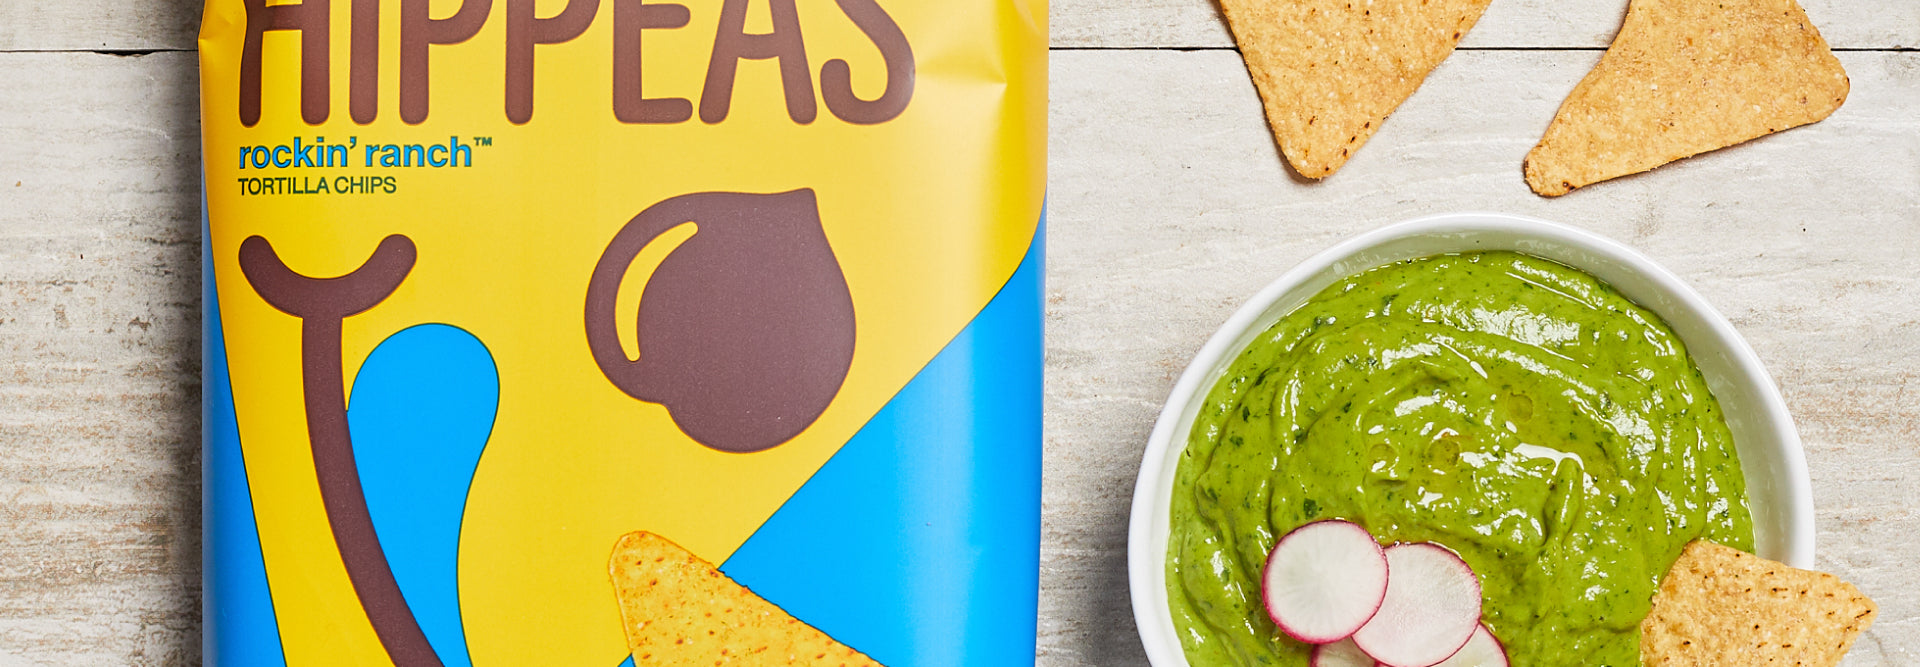 HIPPEAS® Rockin’ Ranch™ Tortilla Chips paired with Avocado Salsa Verde